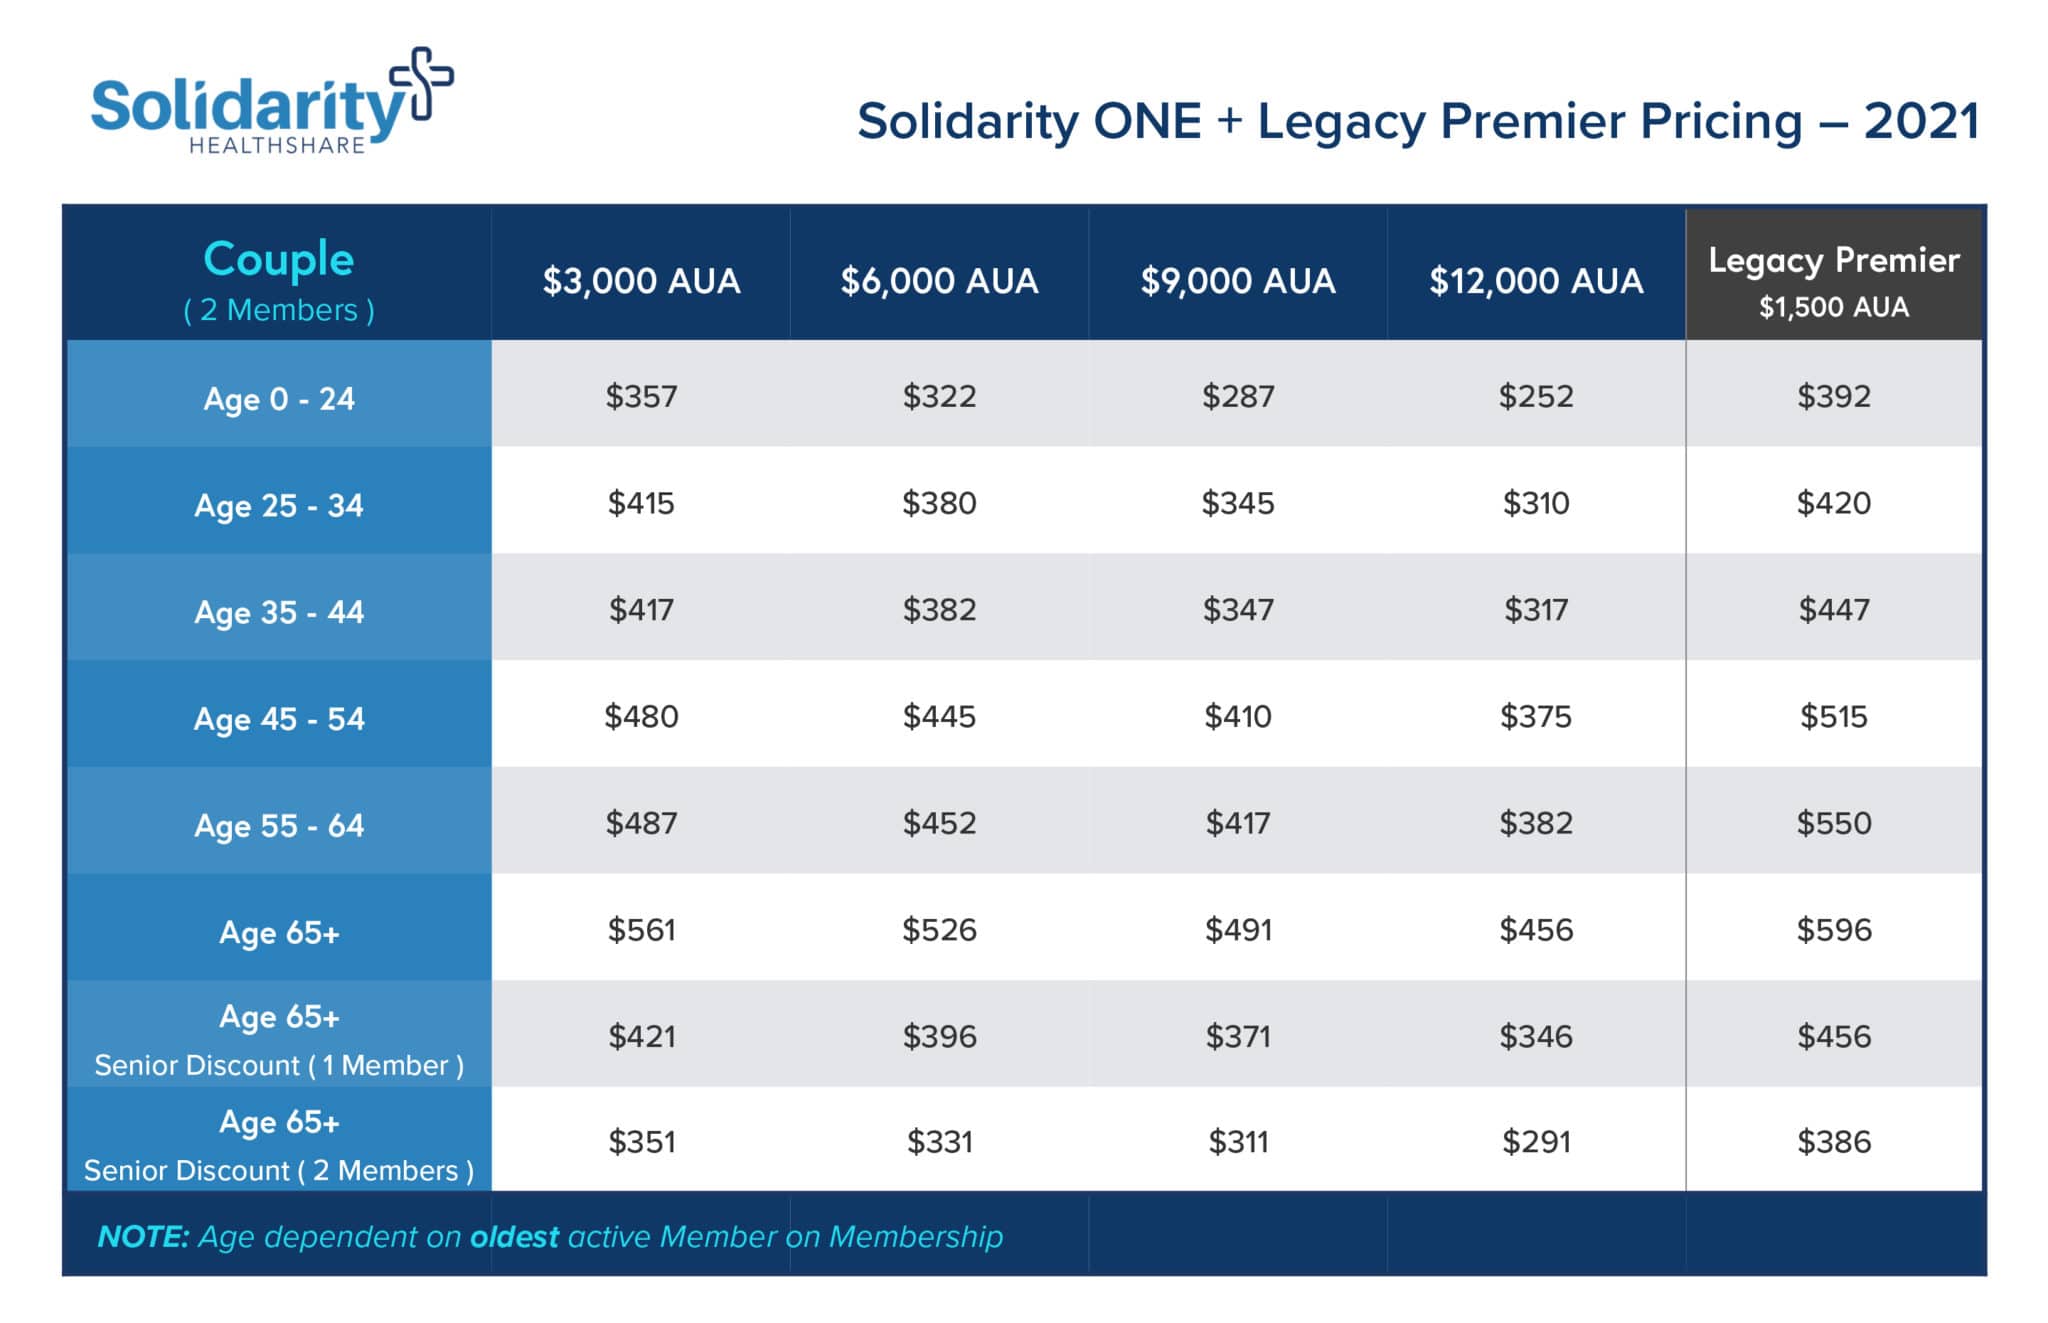 Solidarity ONE + Legacy Premier pricing chart for Couple Memberships.